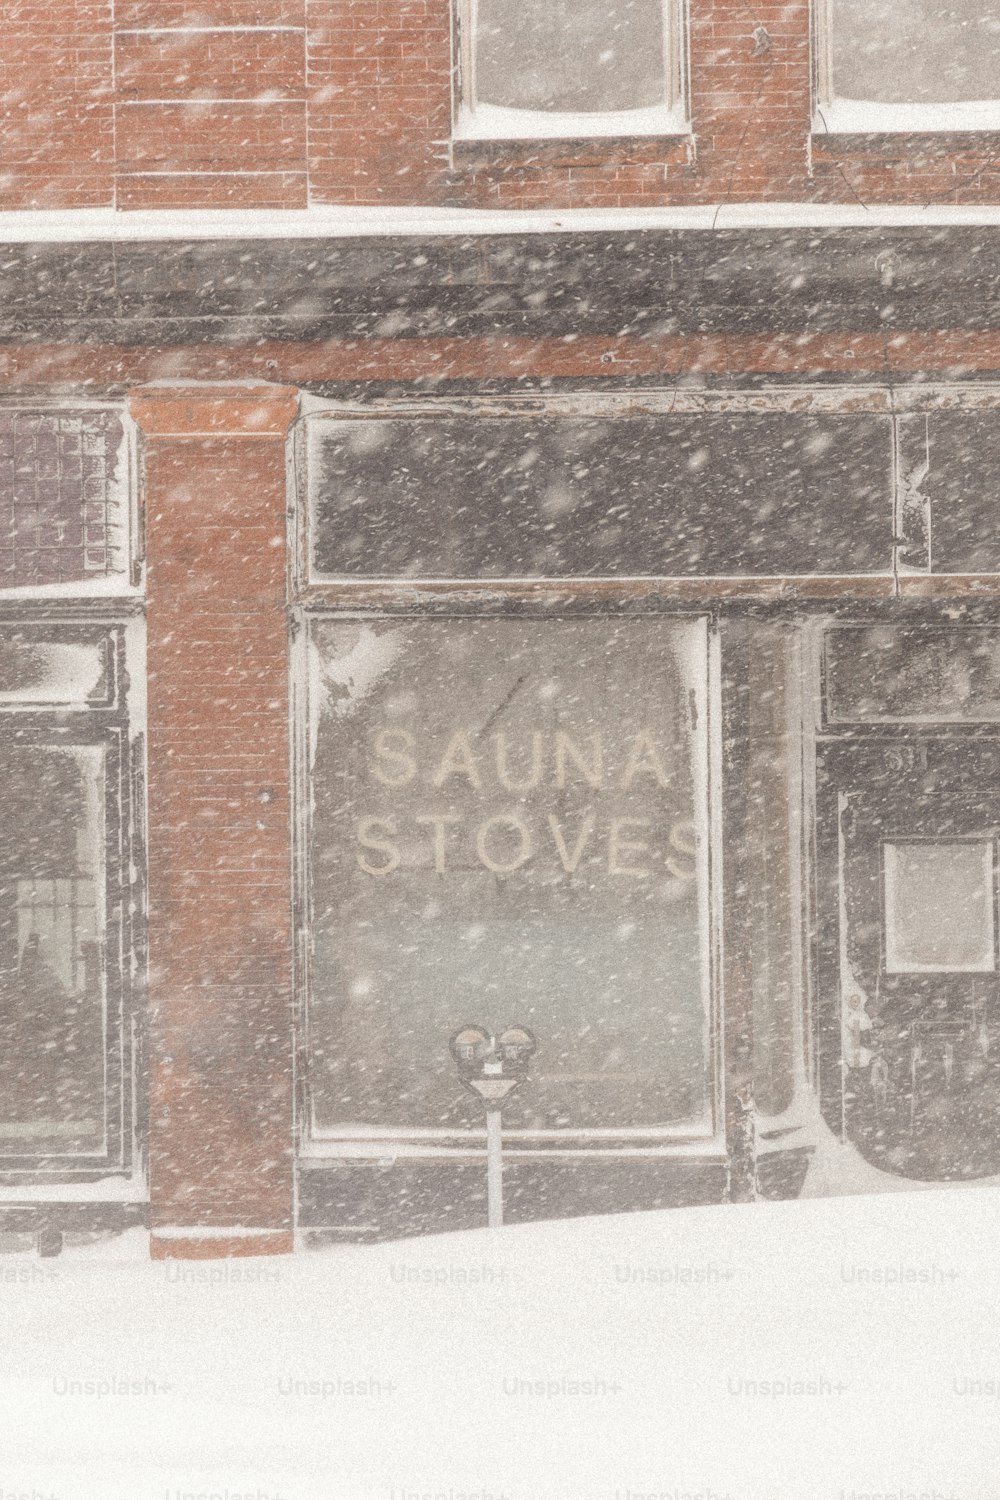 a store front covered in snow on a snowy day